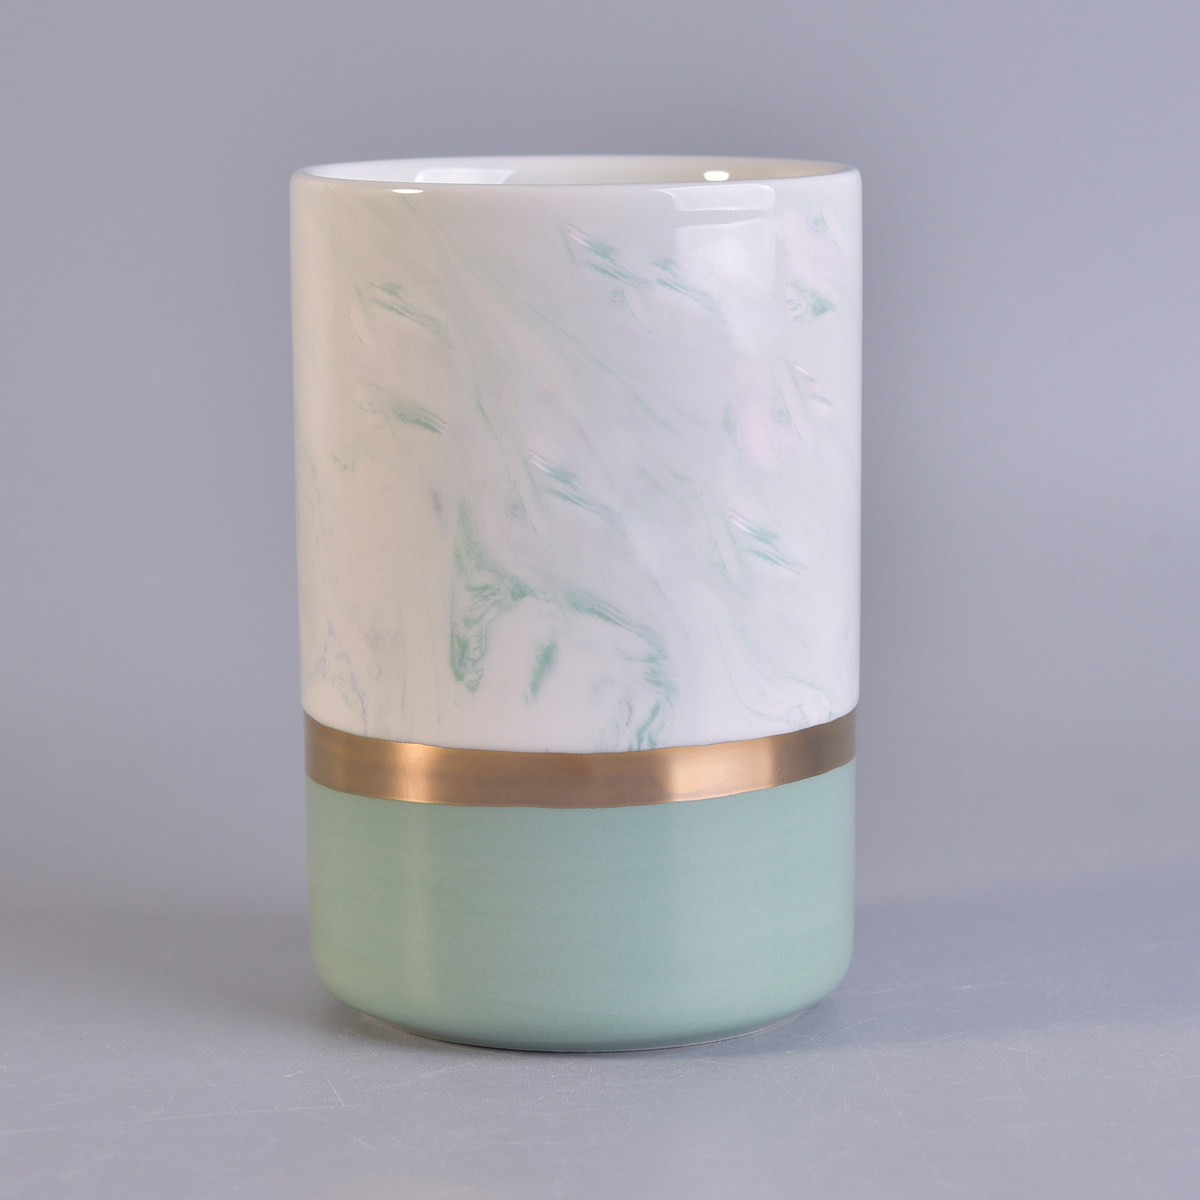 green and white ceramic candle holder, beautiful marble candle container with gold decal